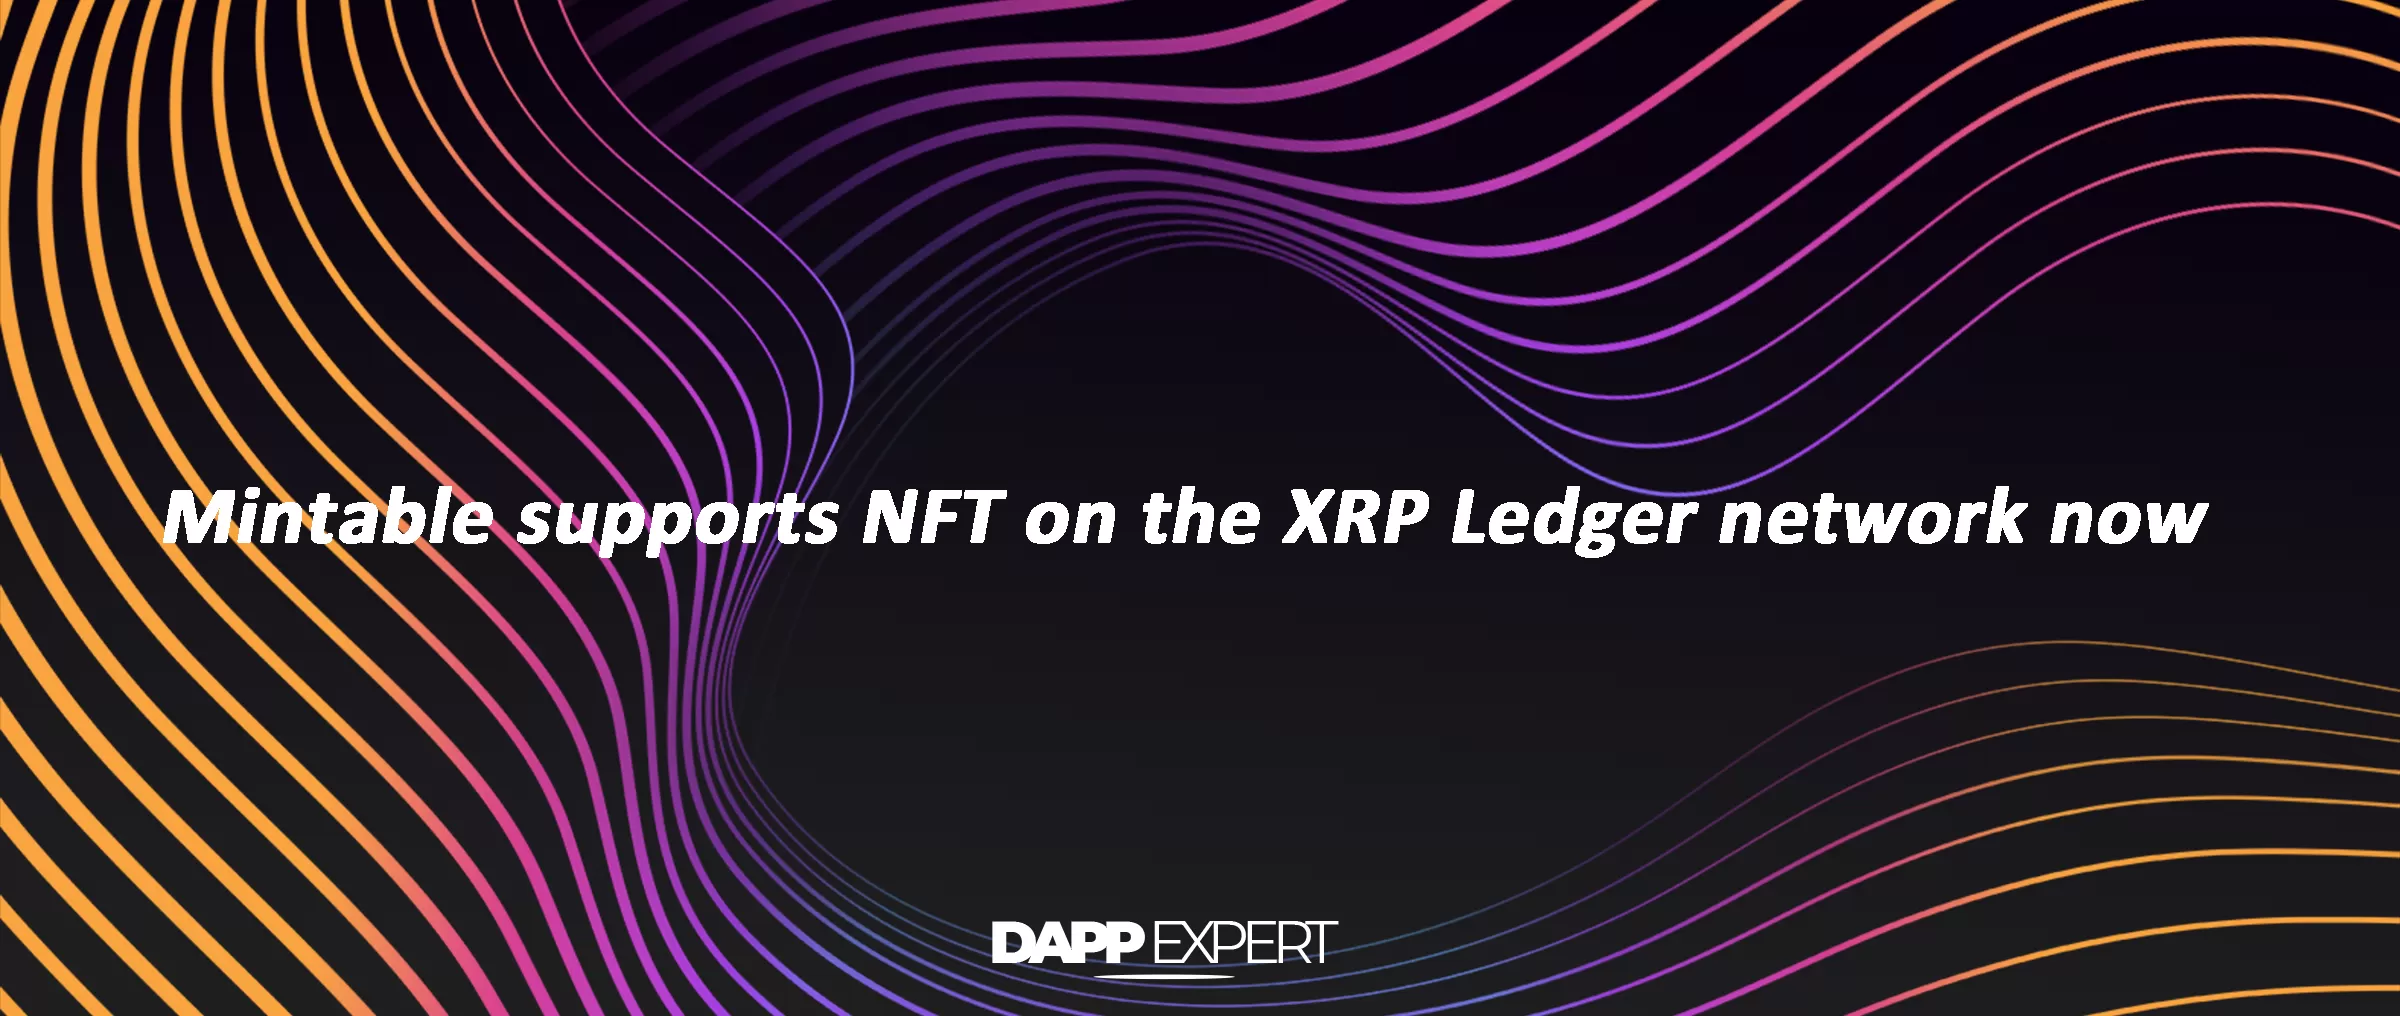 Mintable supports NFT on the XRP Ledger network now